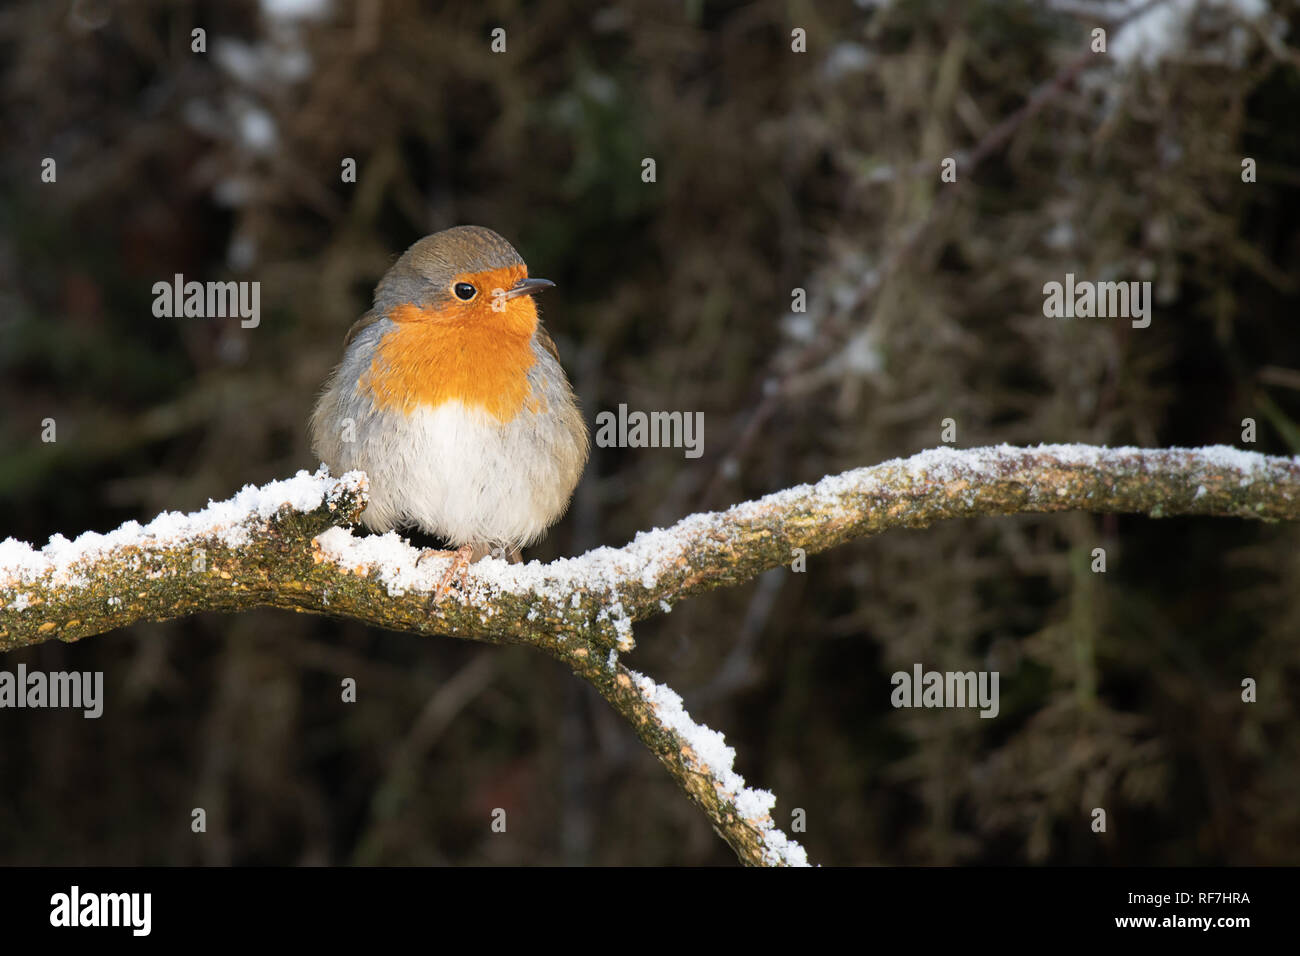 A robin Erithacus rubecula perched on a snow covered branch in a wood with a natural backdrop and copy space Stock Photo